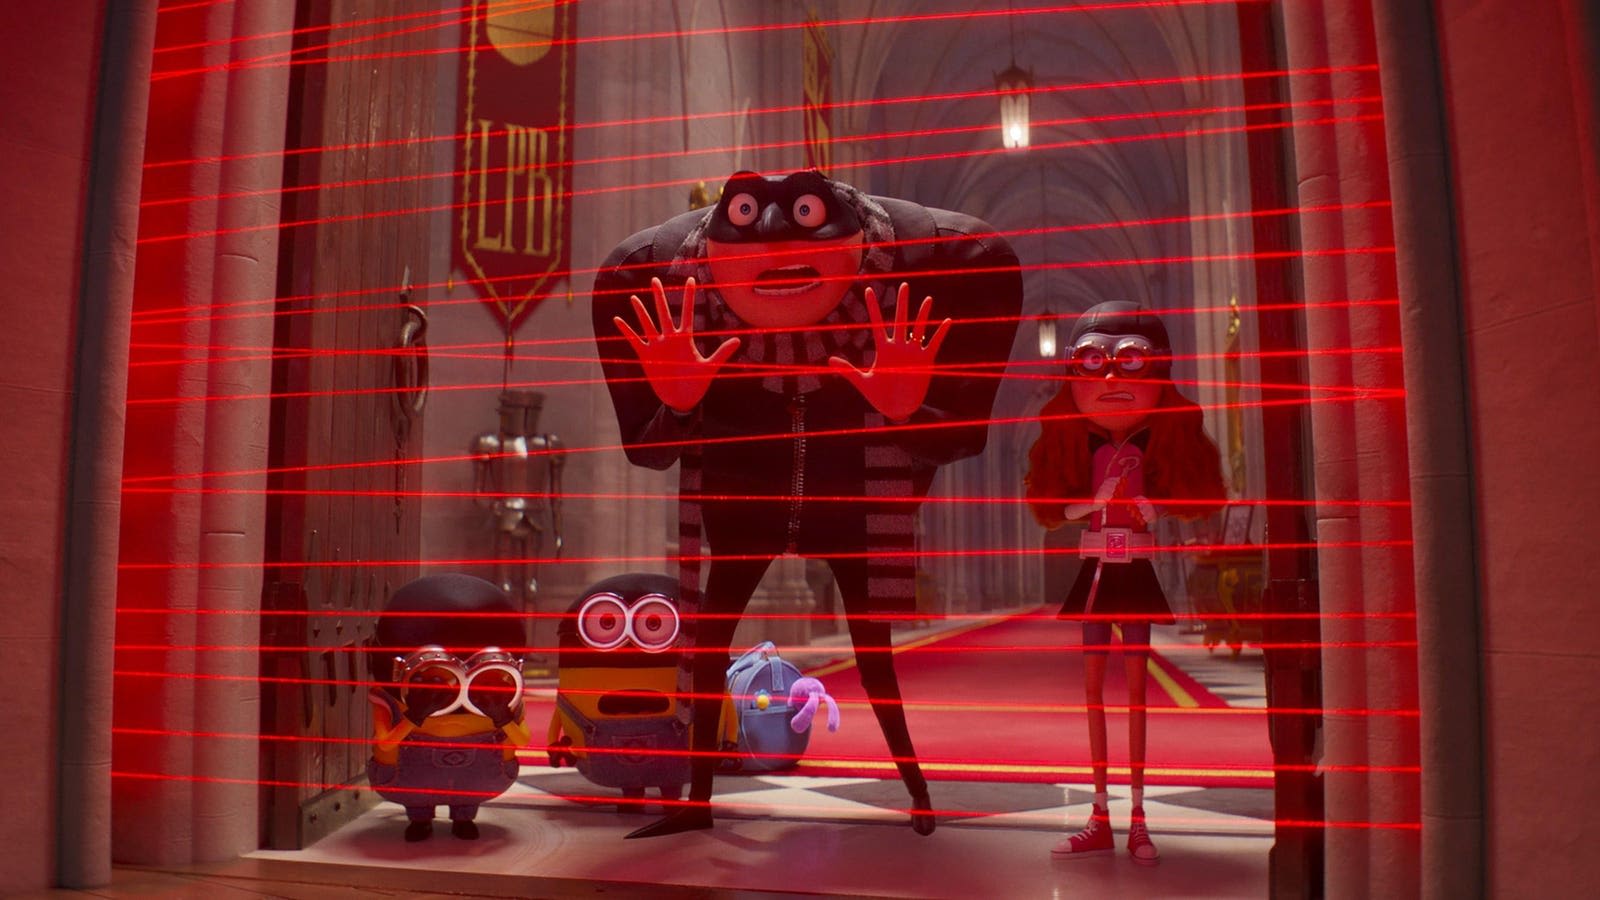 Does ‘Despicable Me 4’ Have An End Credits Scene?